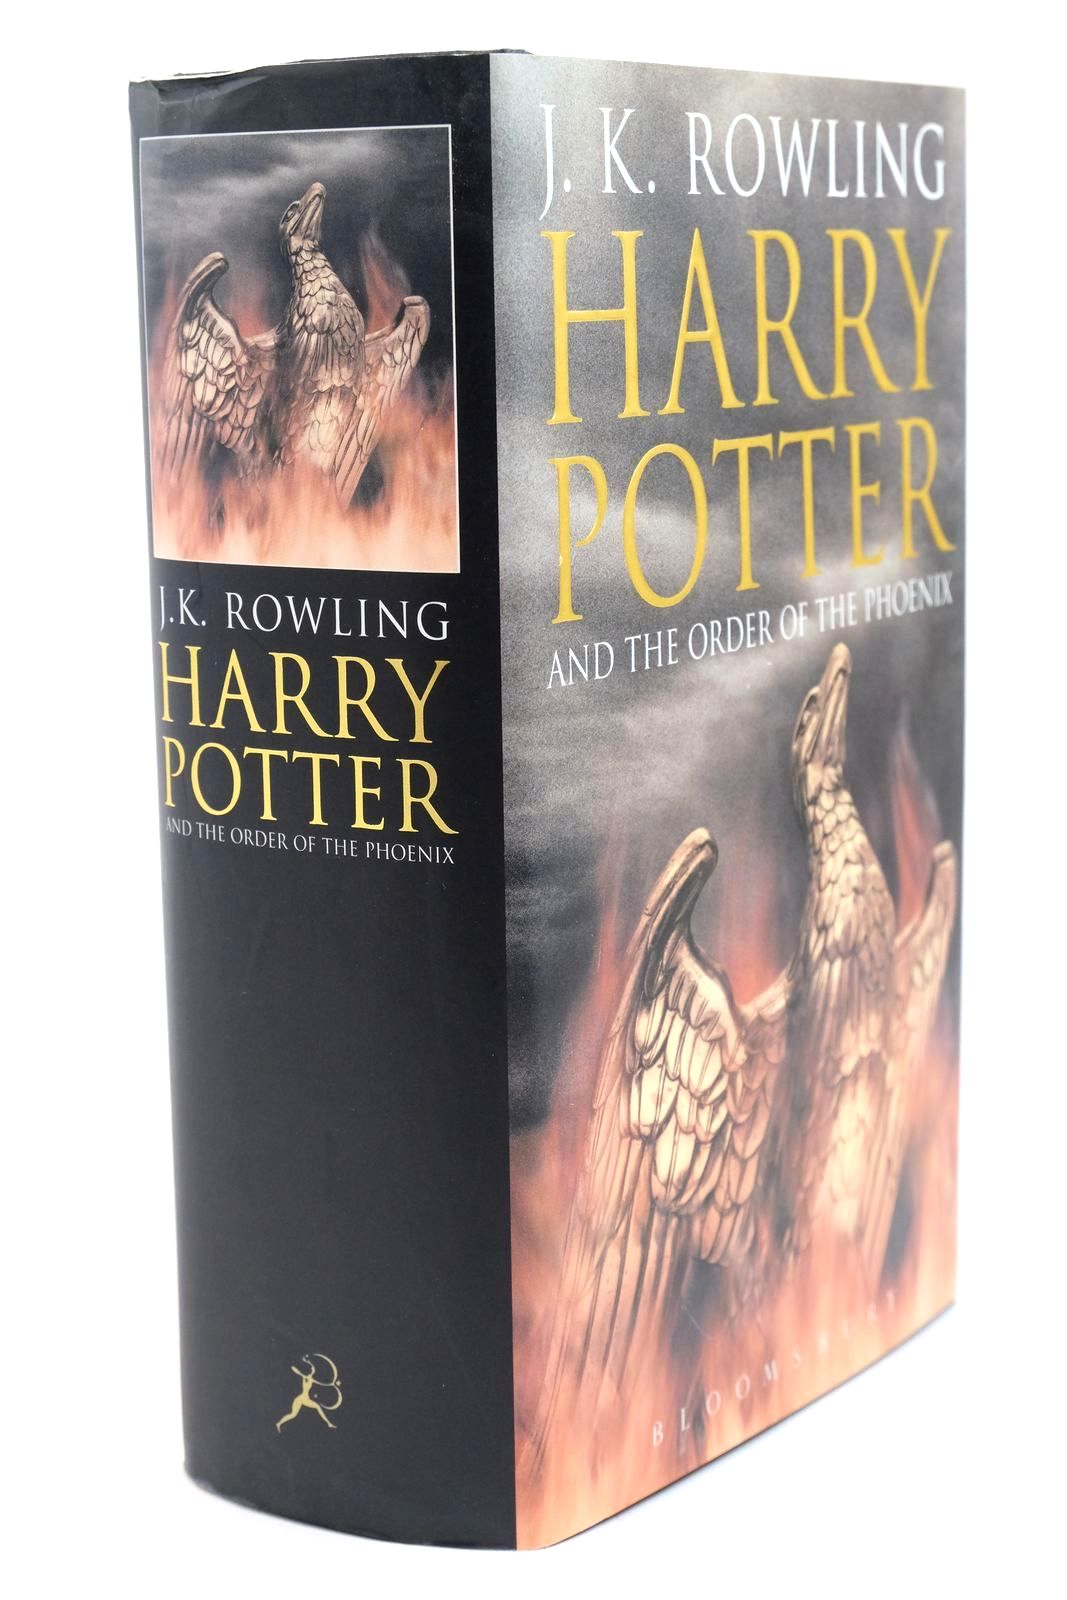 Photo of HARRY POTTER AND THE ORDER OF THE PHOENIX written by Rowling, J.K. published by Bloomsbury (STOCK CODE: 1321429)  for sale by Stella & Rose's Books